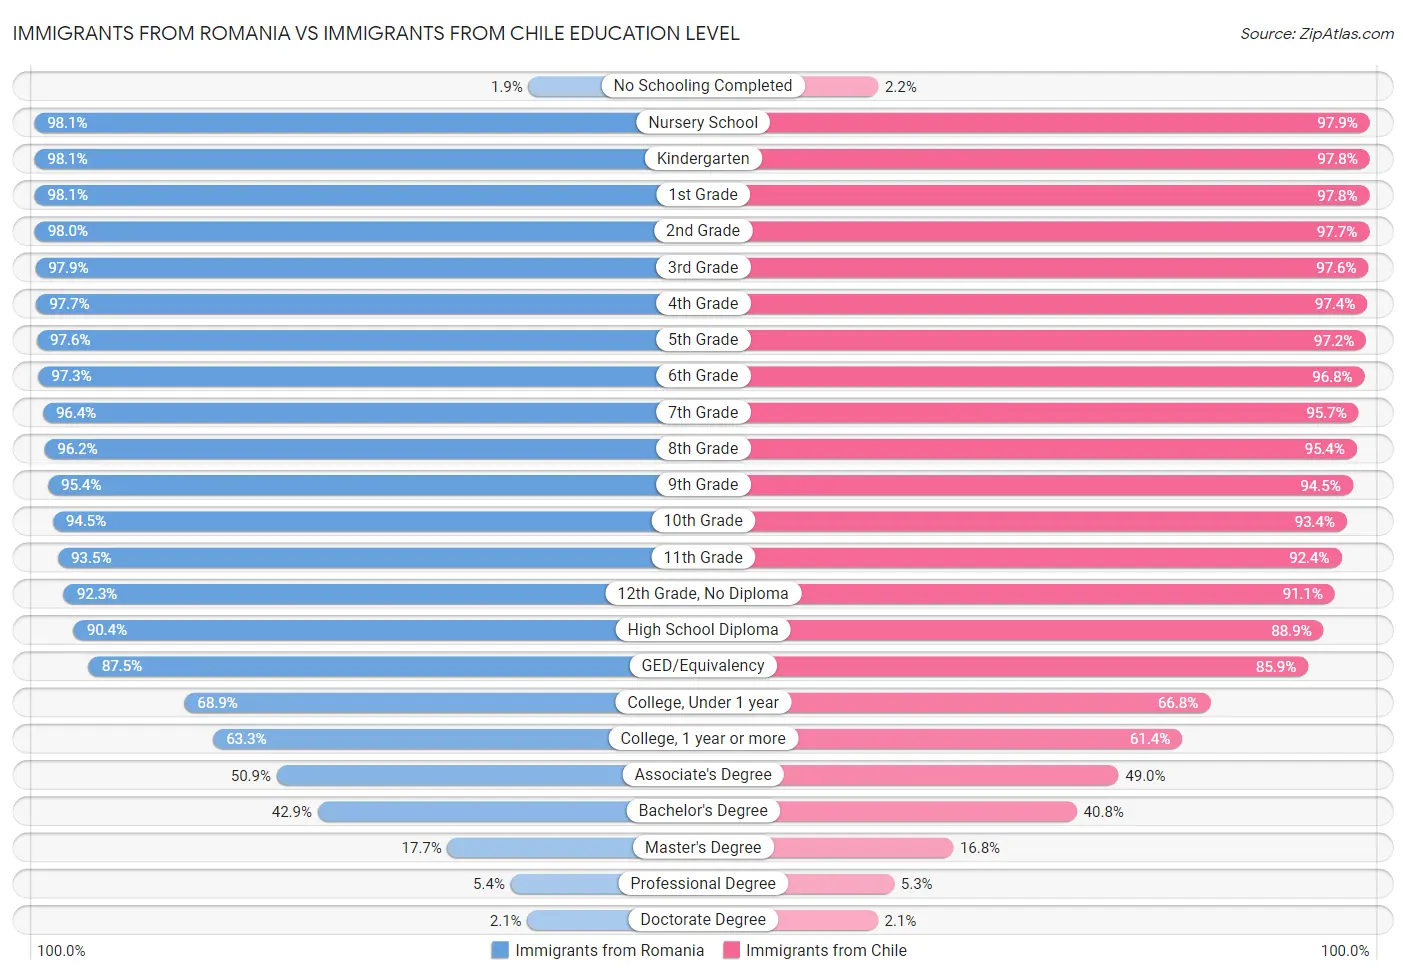 Immigrants from Romania vs Immigrants from Chile Education Level